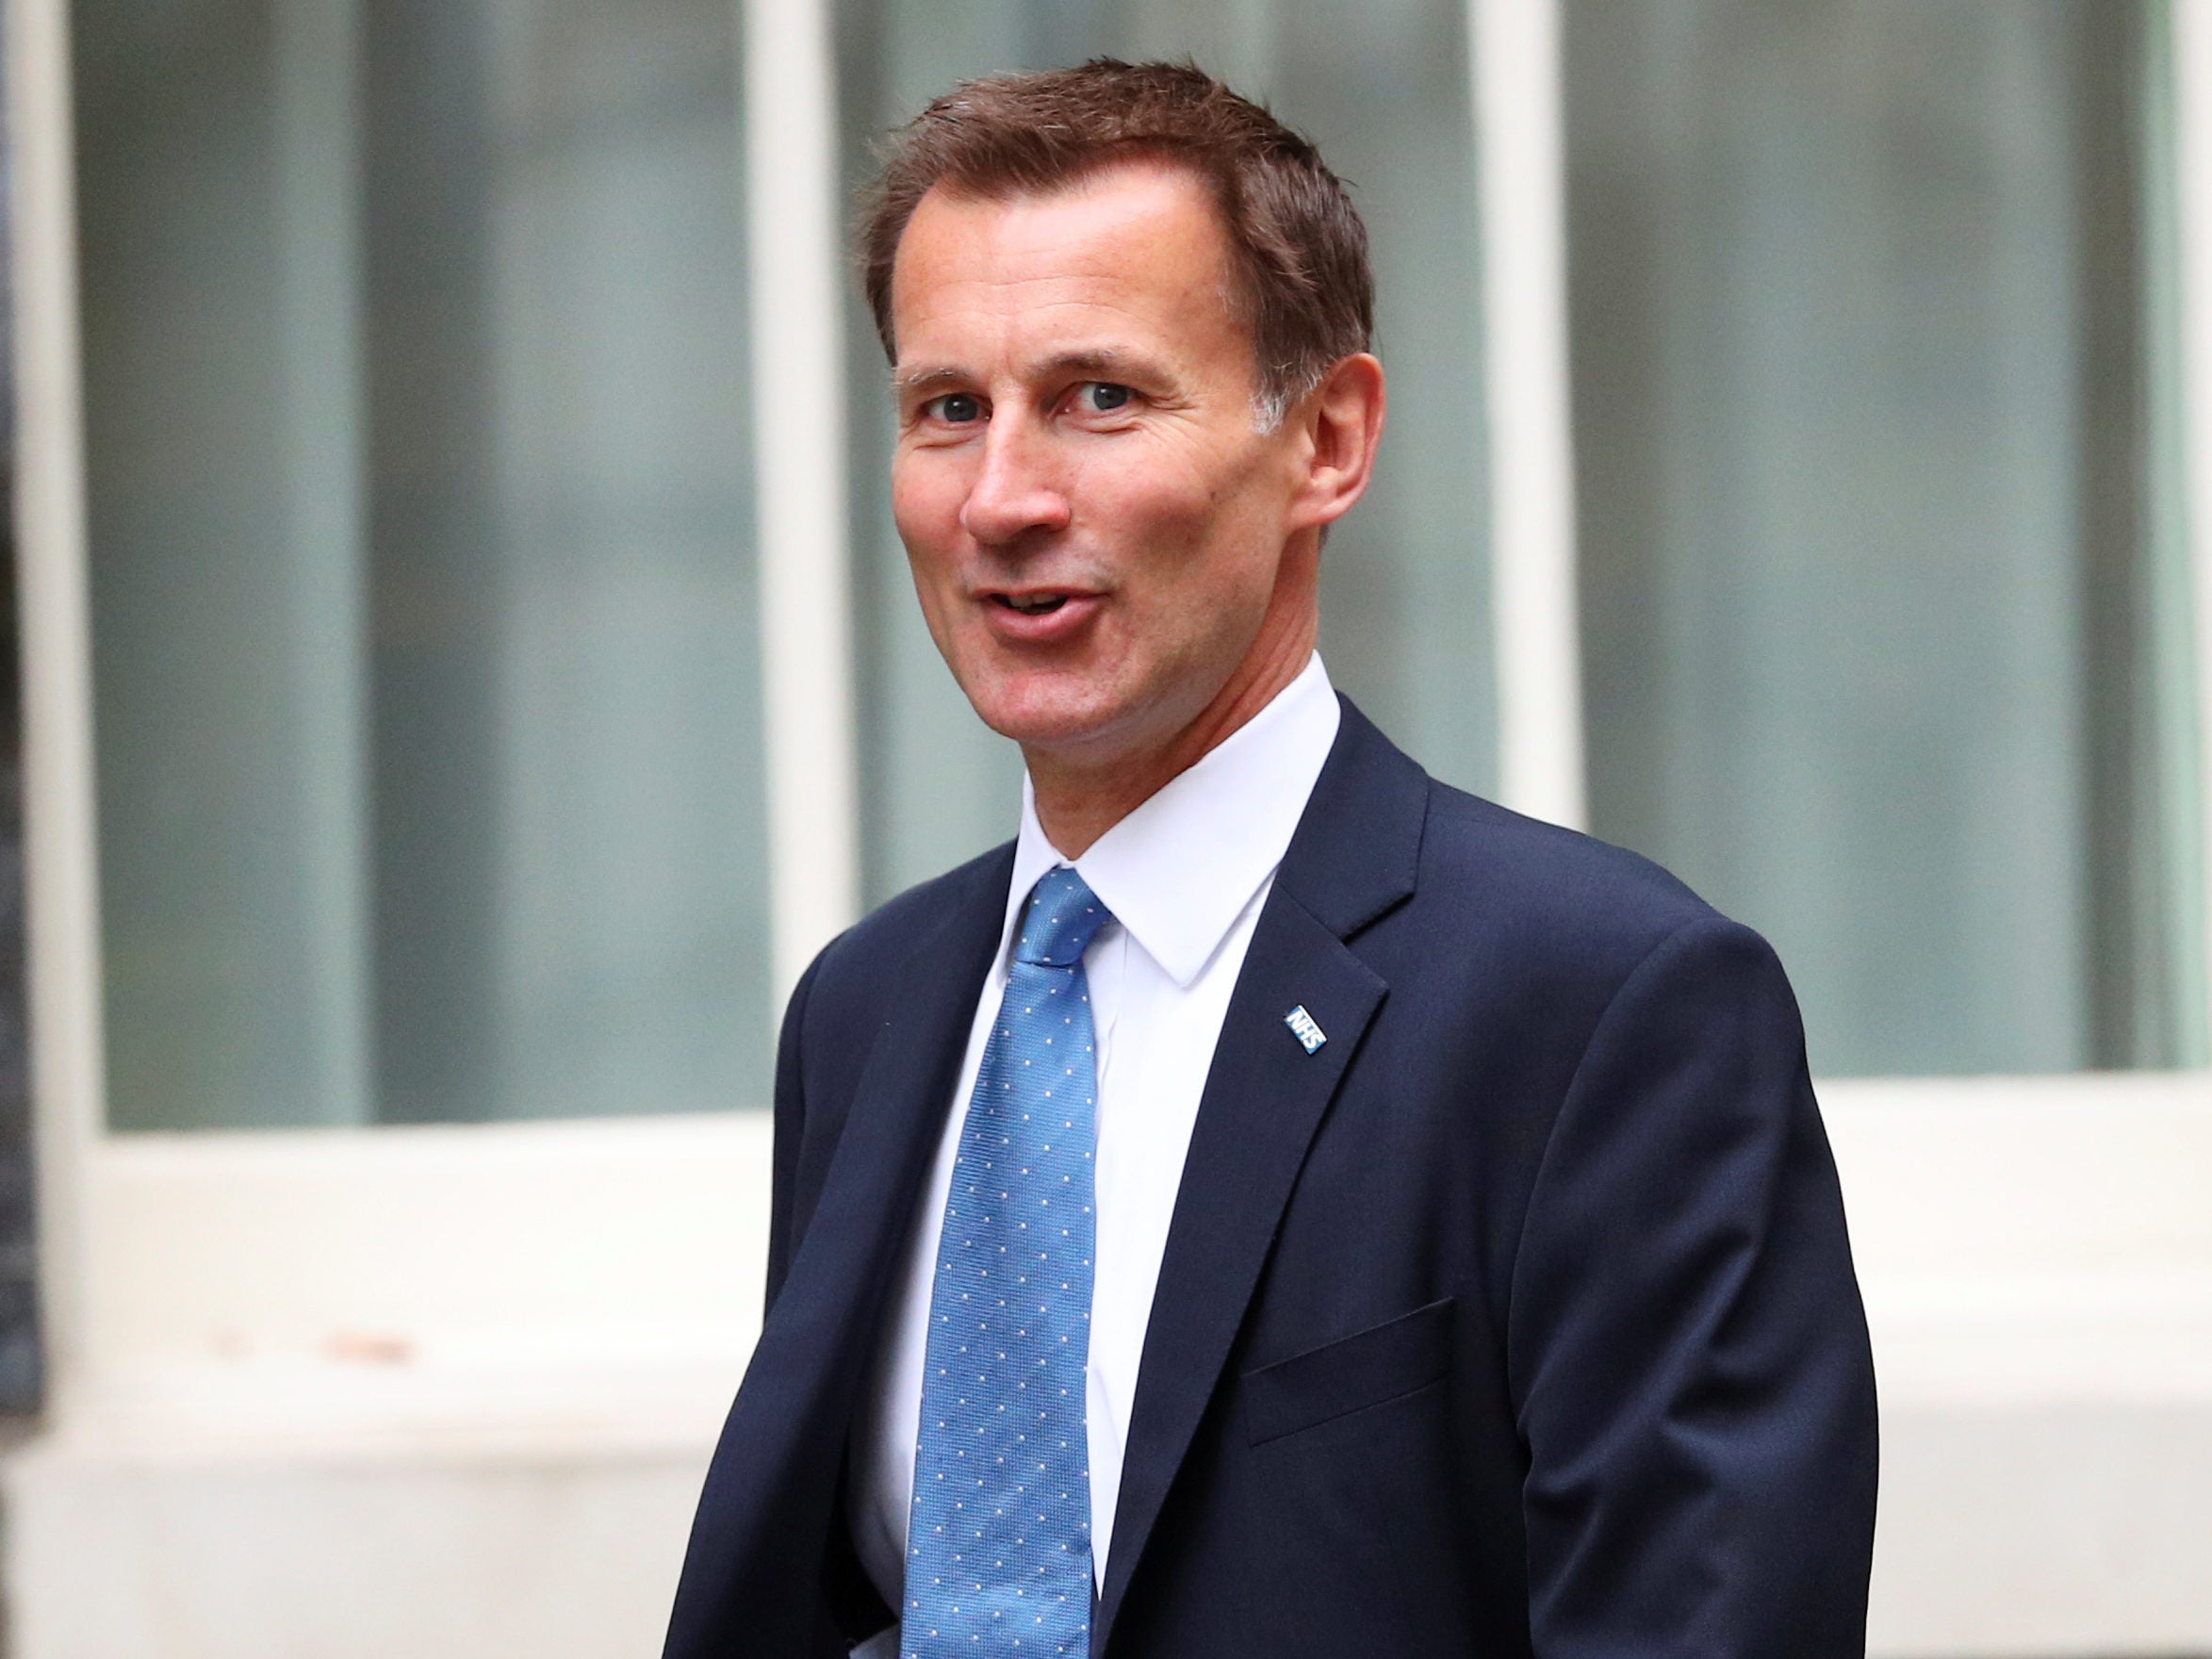 Jeremy Hunt: Broadcaster RT (Russia Today) is part of Russia's efforts to 'destabilise our democracies'